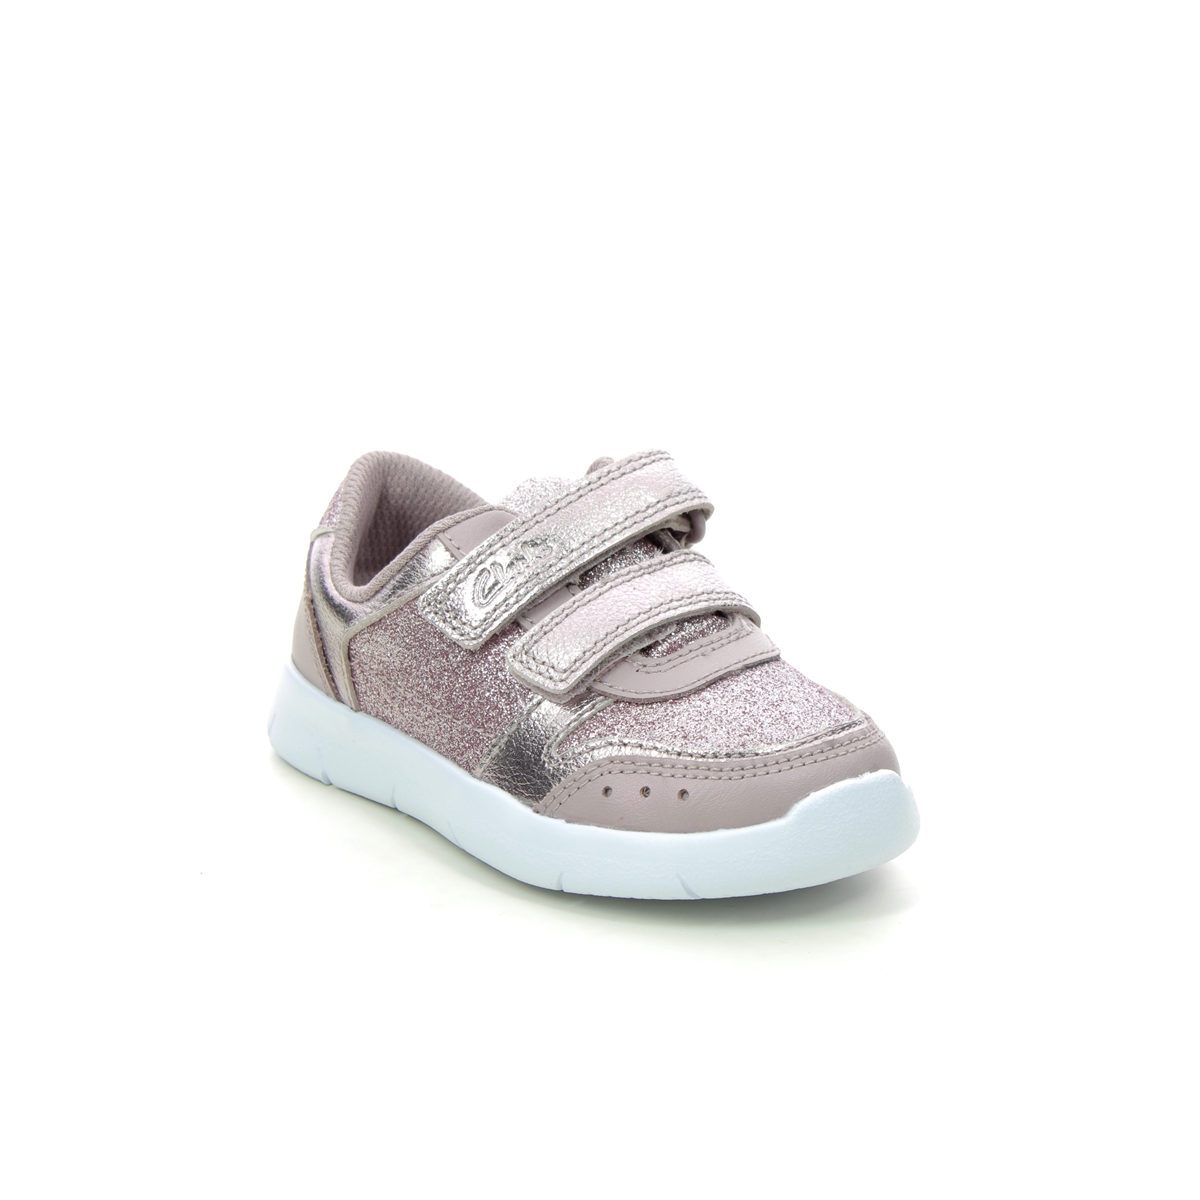 Clarks Ath Sonar T Pink Kids Toddler Girls Trainers 683727G In Size 5.5 In Plain Pink G Width Fitting For kids